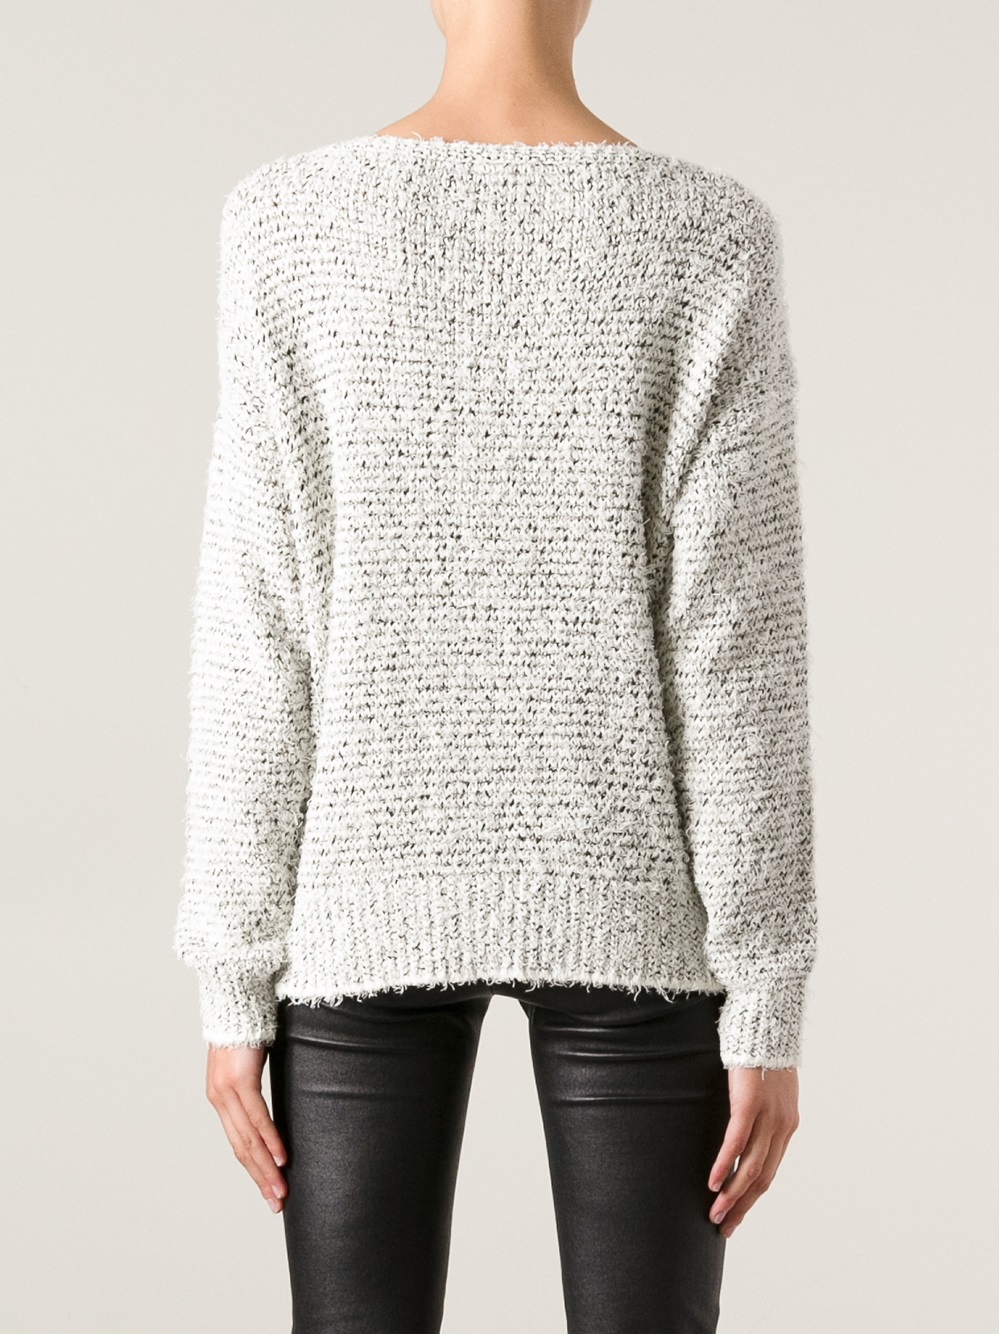 Joie Camille Knit Sweater in White - Lyst